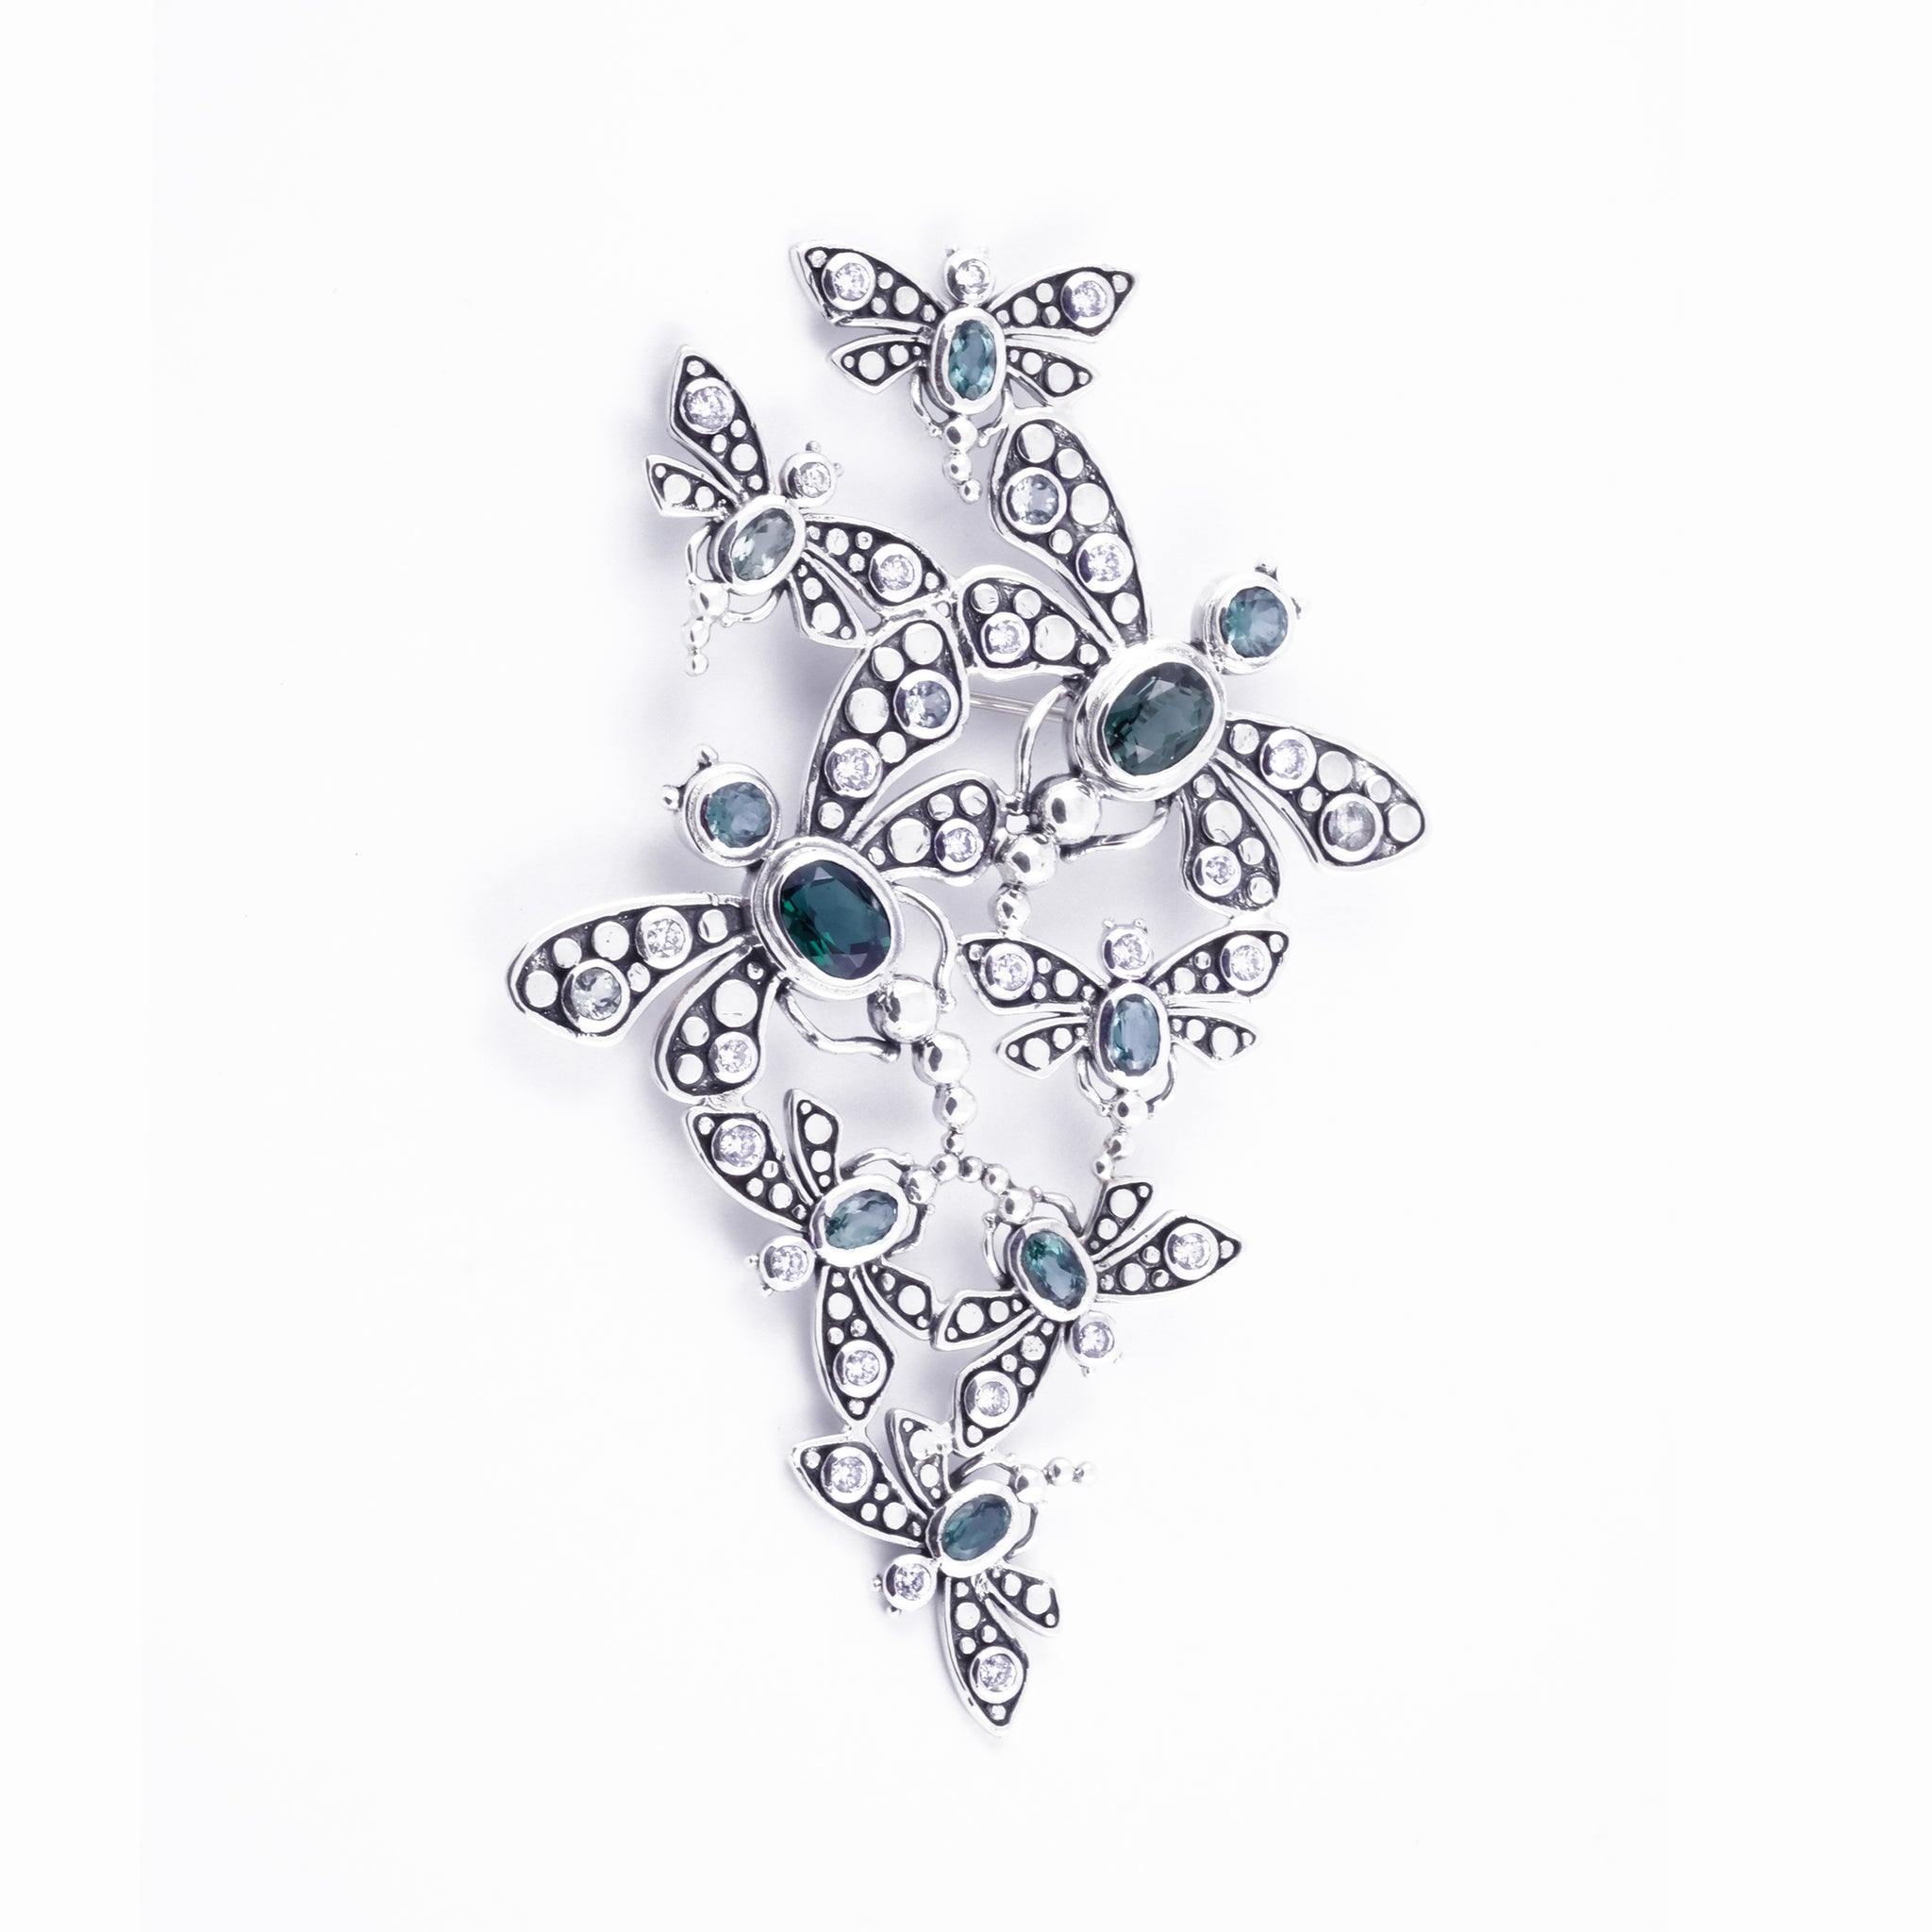 Dragonfly brooch In 925 Sterling Silver With Gemstone Capung Bali Collection Brooch in Sterling Silver